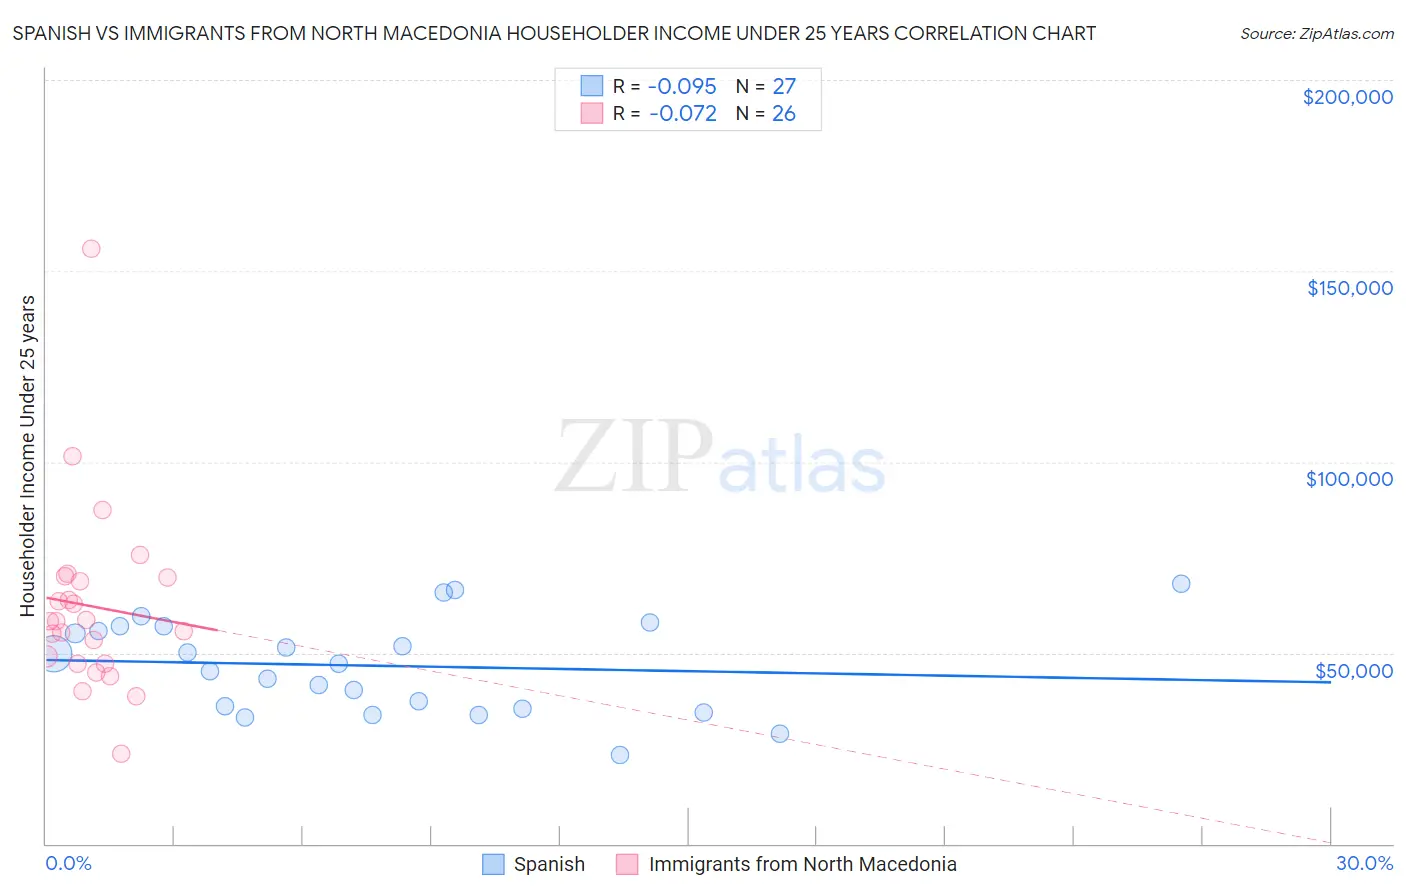 Spanish vs Immigrants from North Macedonia Householder Income Under 25 years